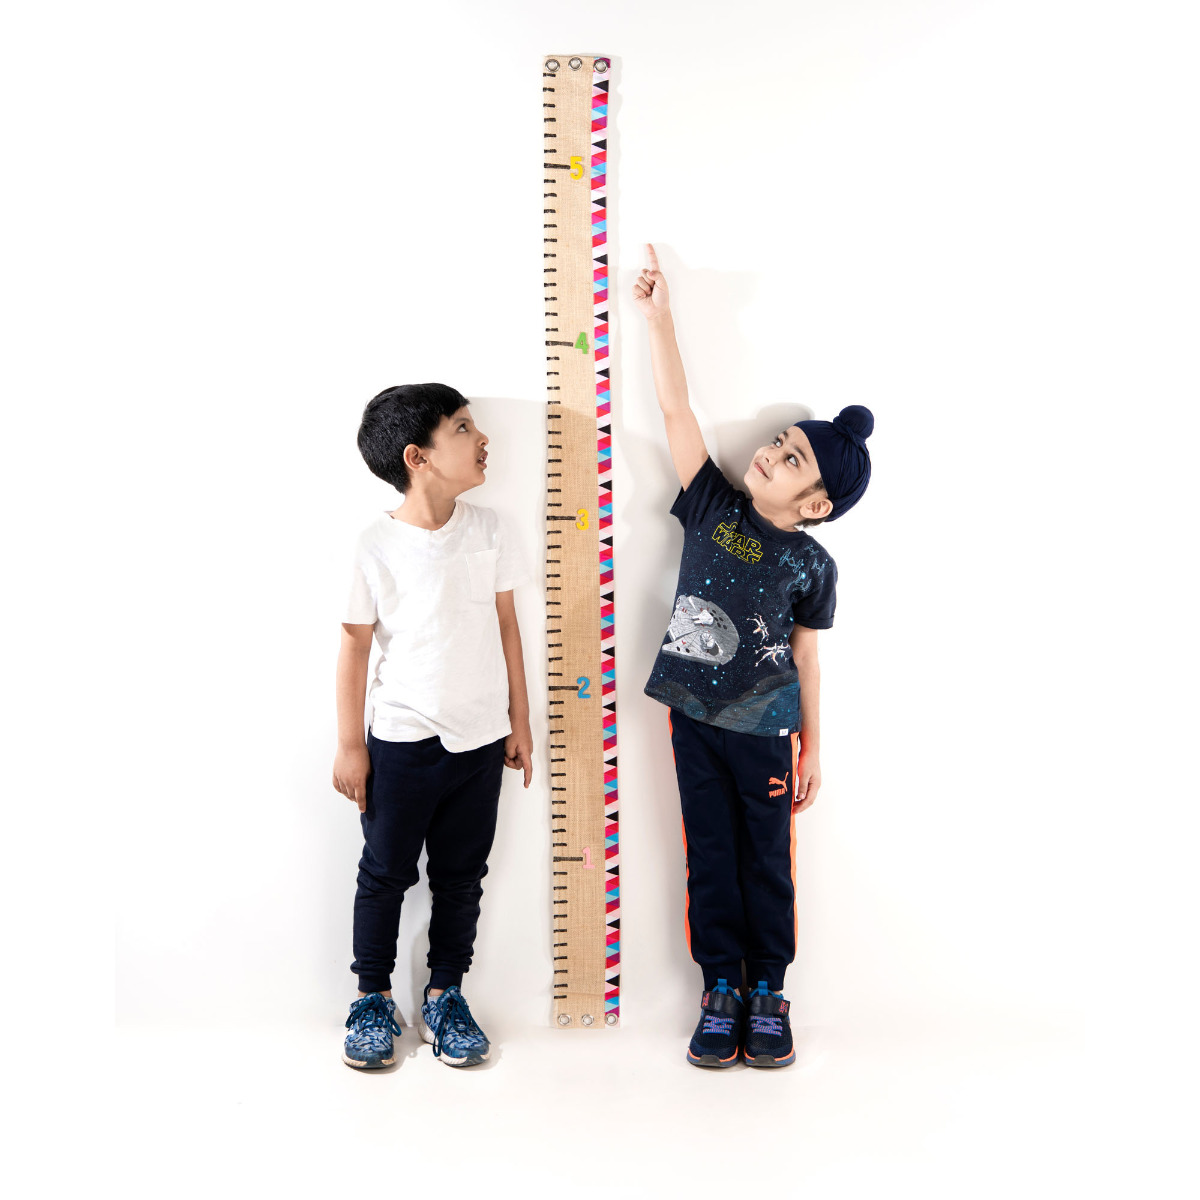 Height Chart - Buy Height Measuring Chart Online at Best Price in India